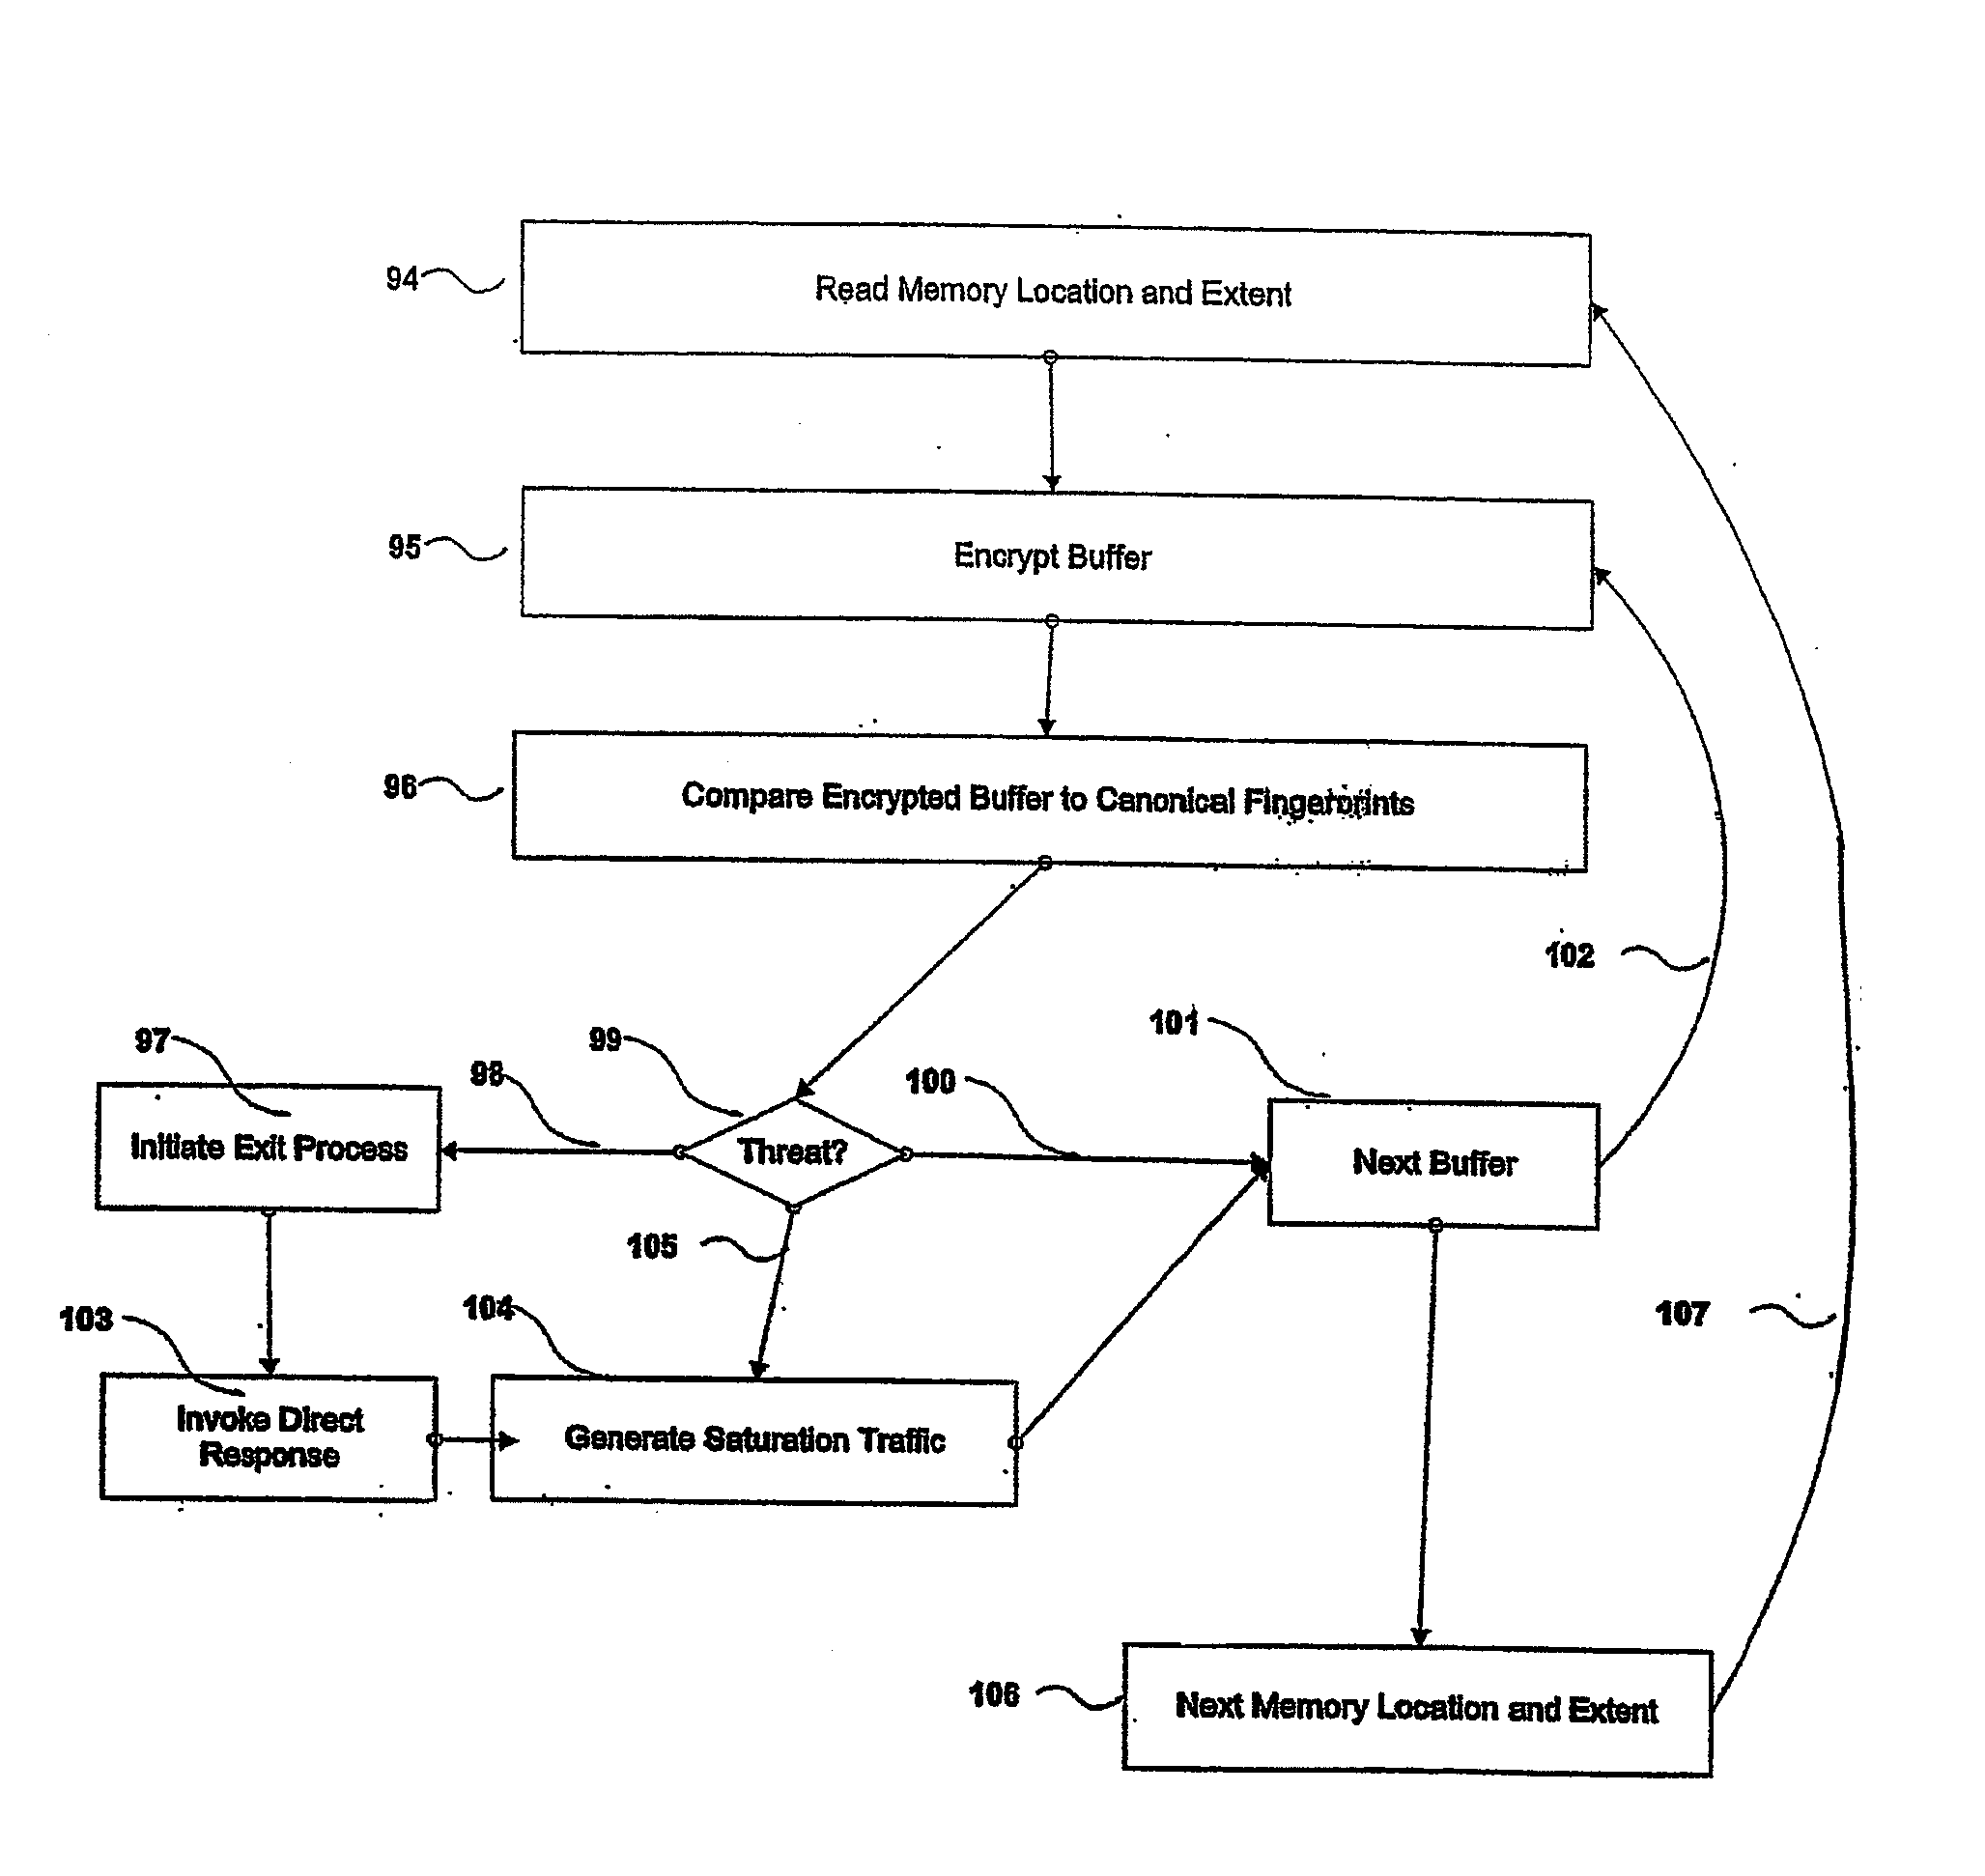 Systems and methods for the prevention of unauthorized use and manipulation of digital content